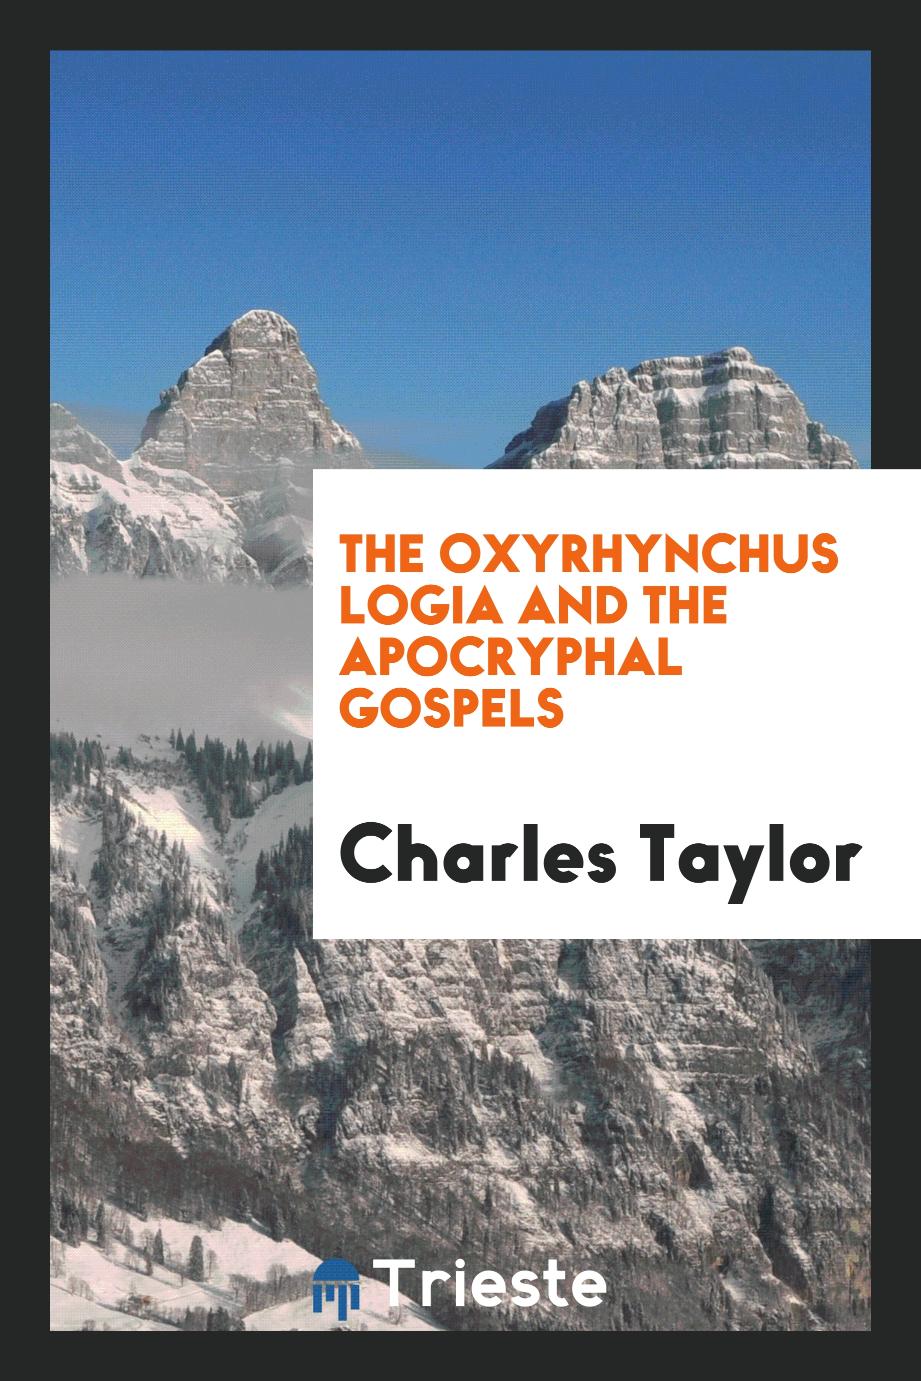 The Oxyrhynchus Logia and the Apocryphal Gospels